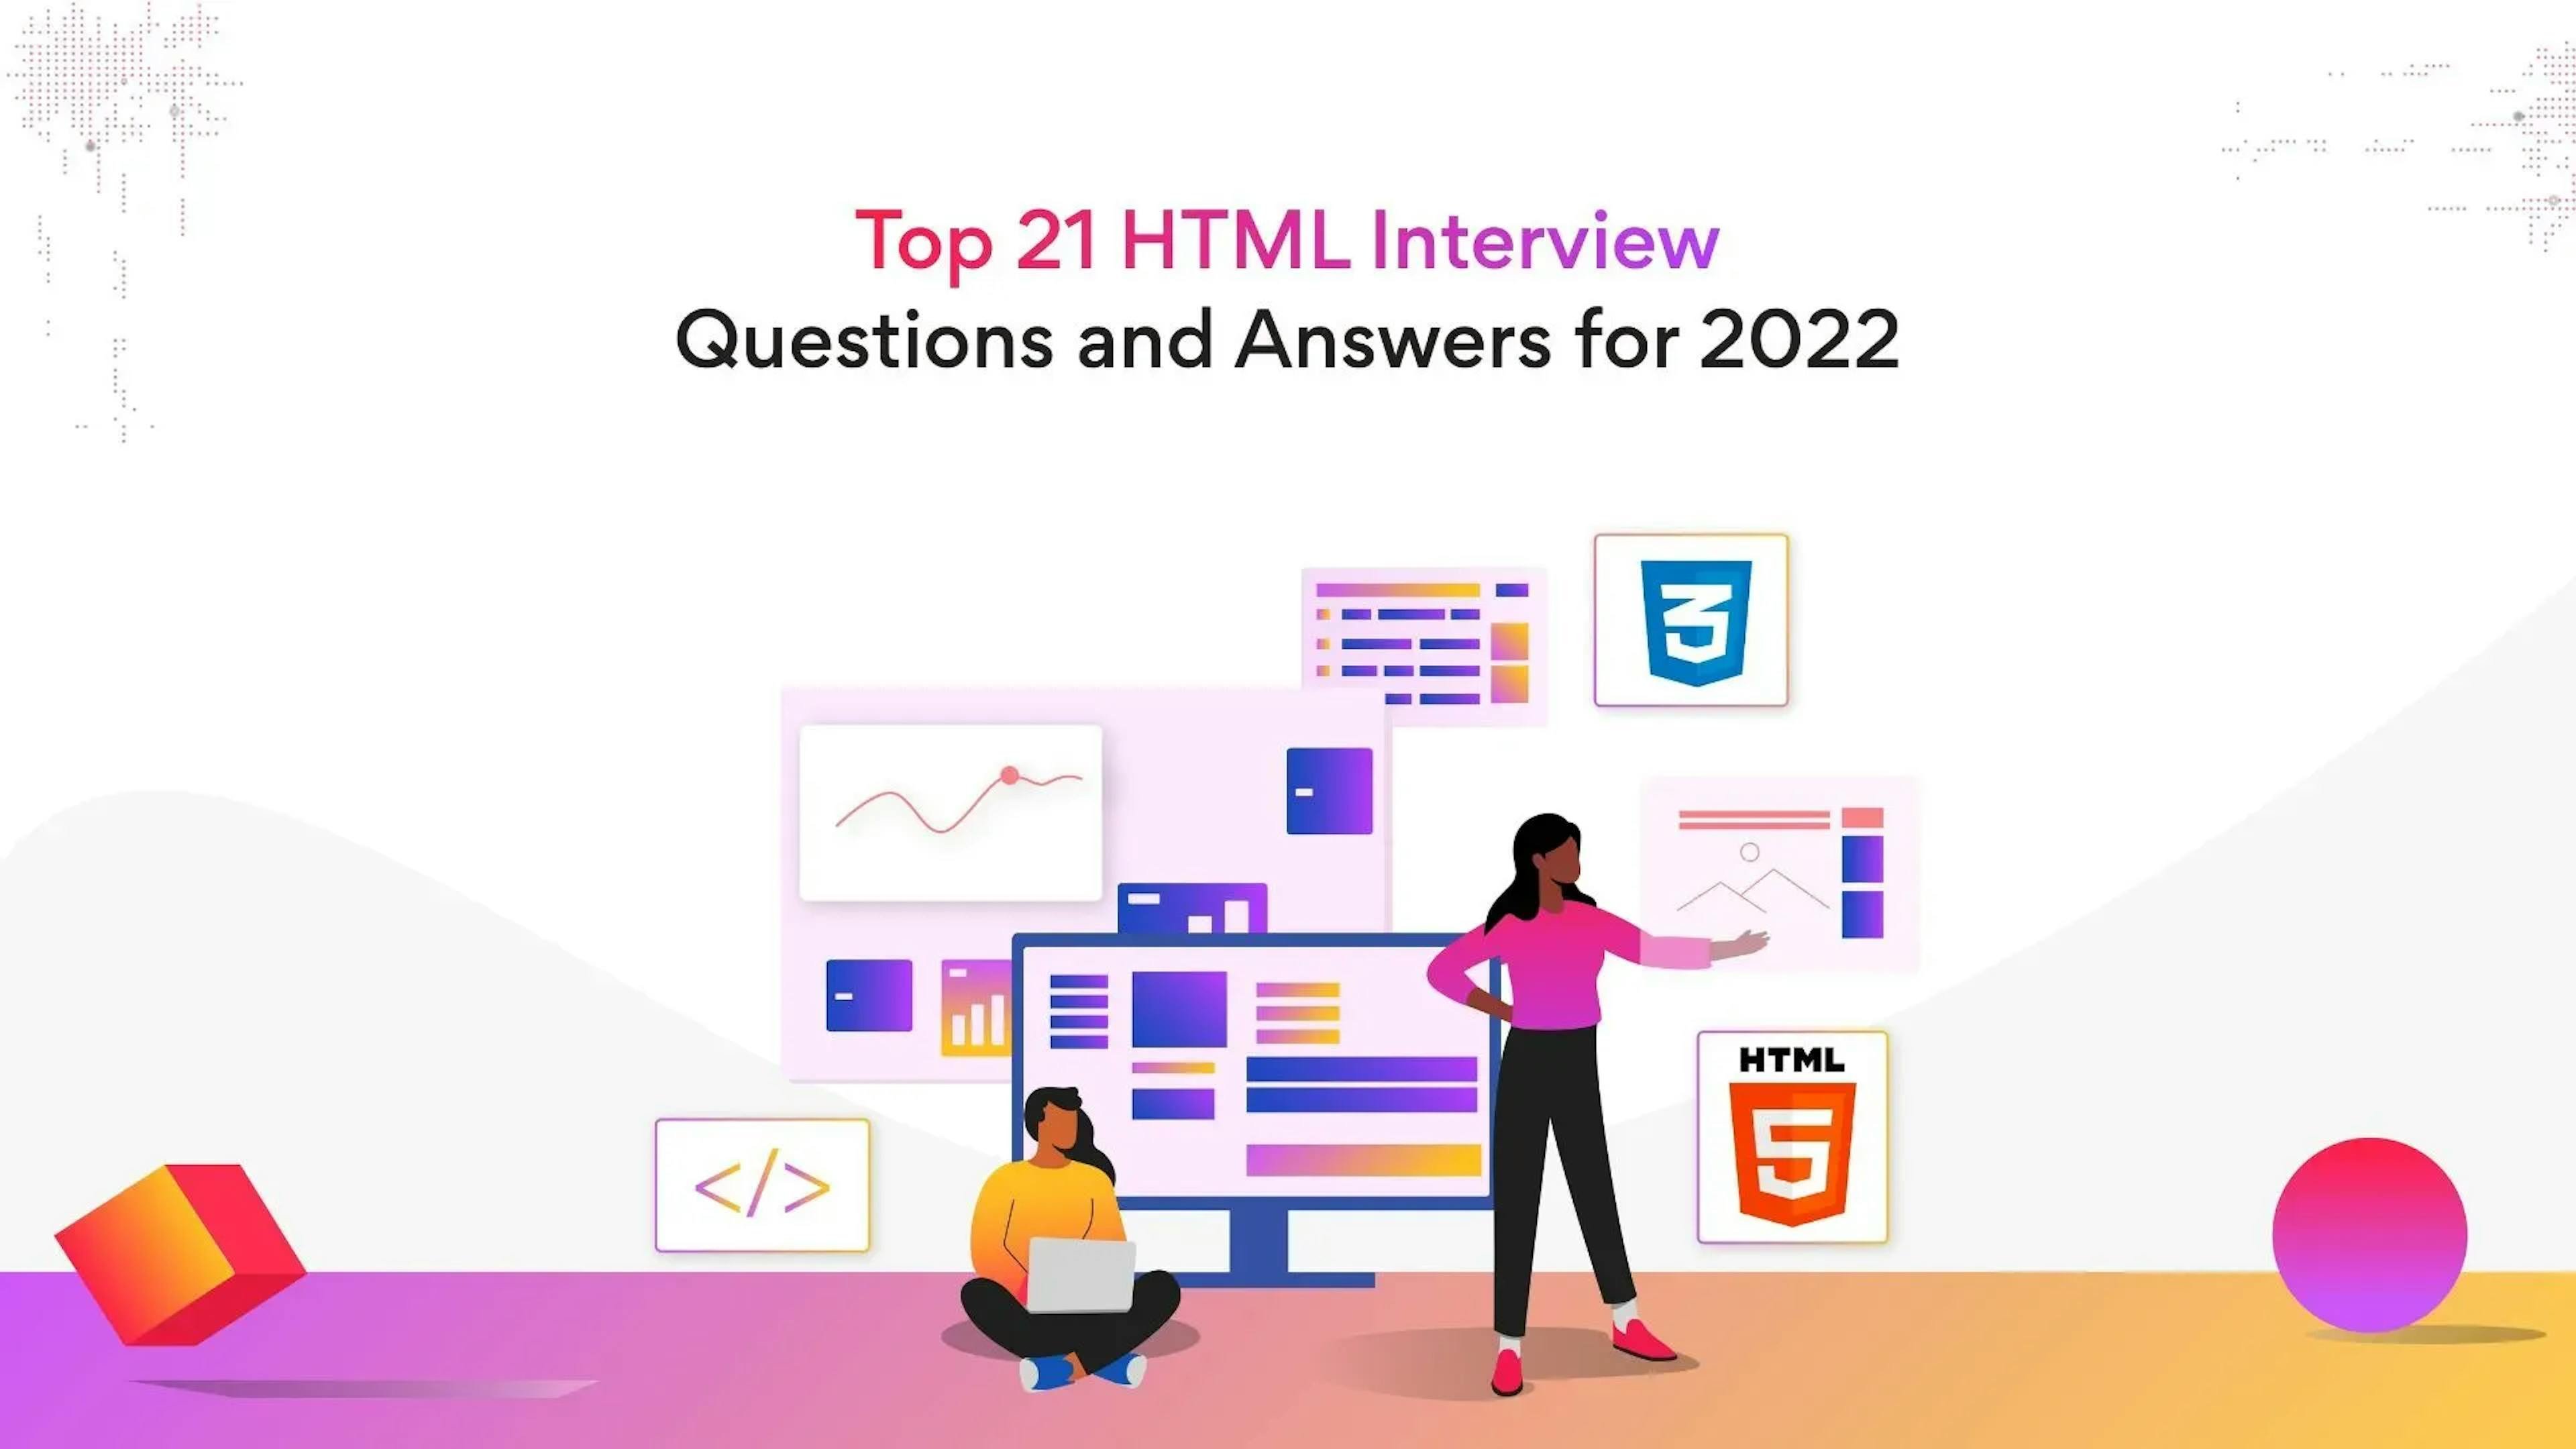 Top 21 HTML Interview Questions and Answers